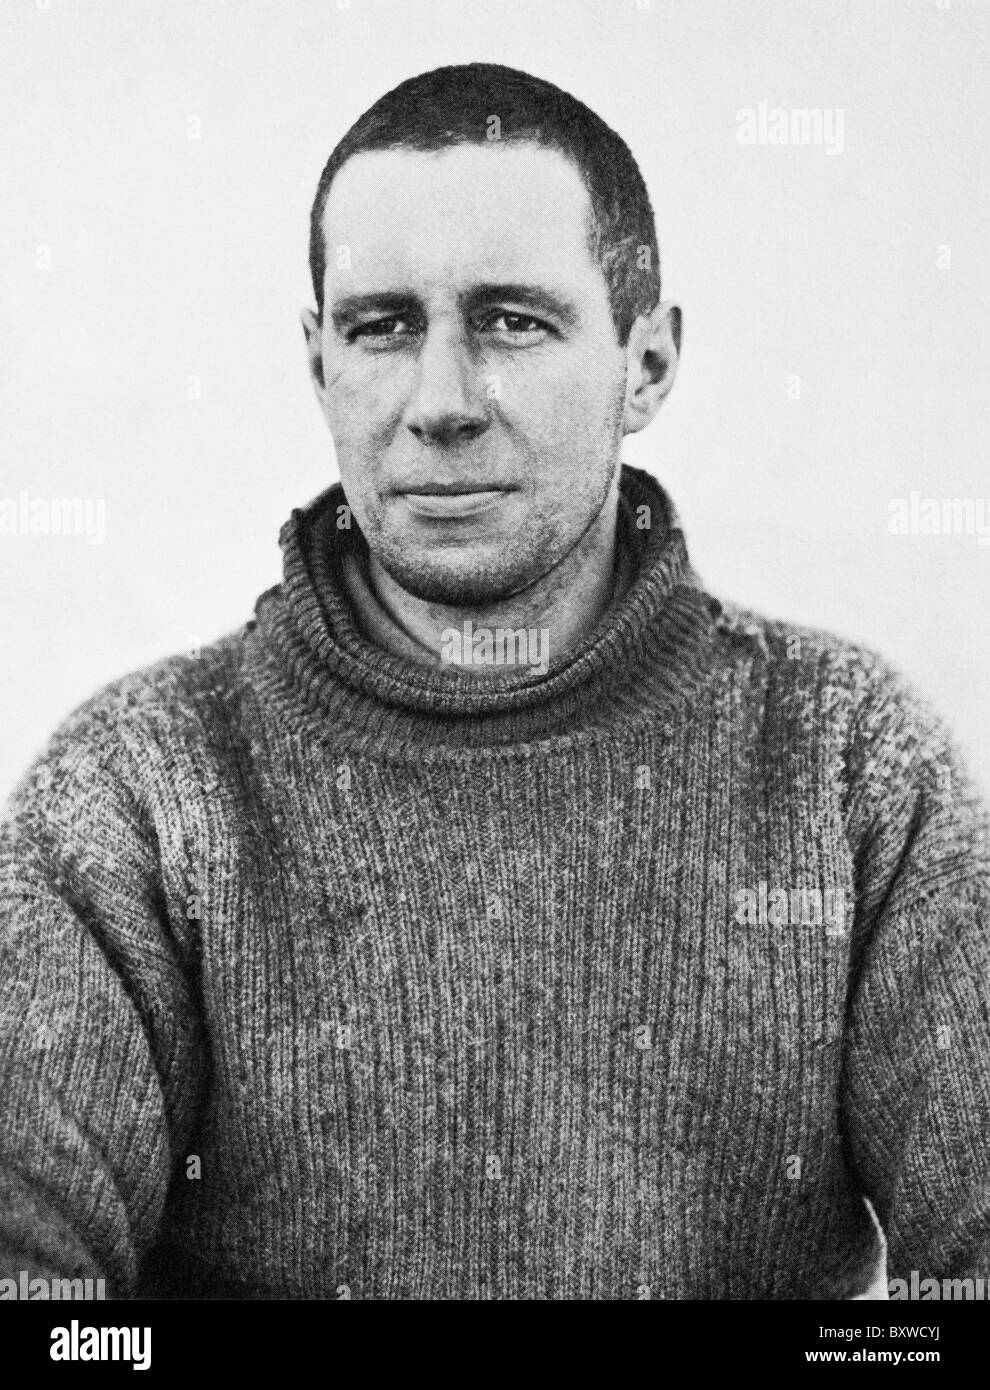 Lawrence Oates (1880 - 1912) - a member of Robert Scott's Terra Nova Expedition that perished after reaching the South Pole. Stock Photo